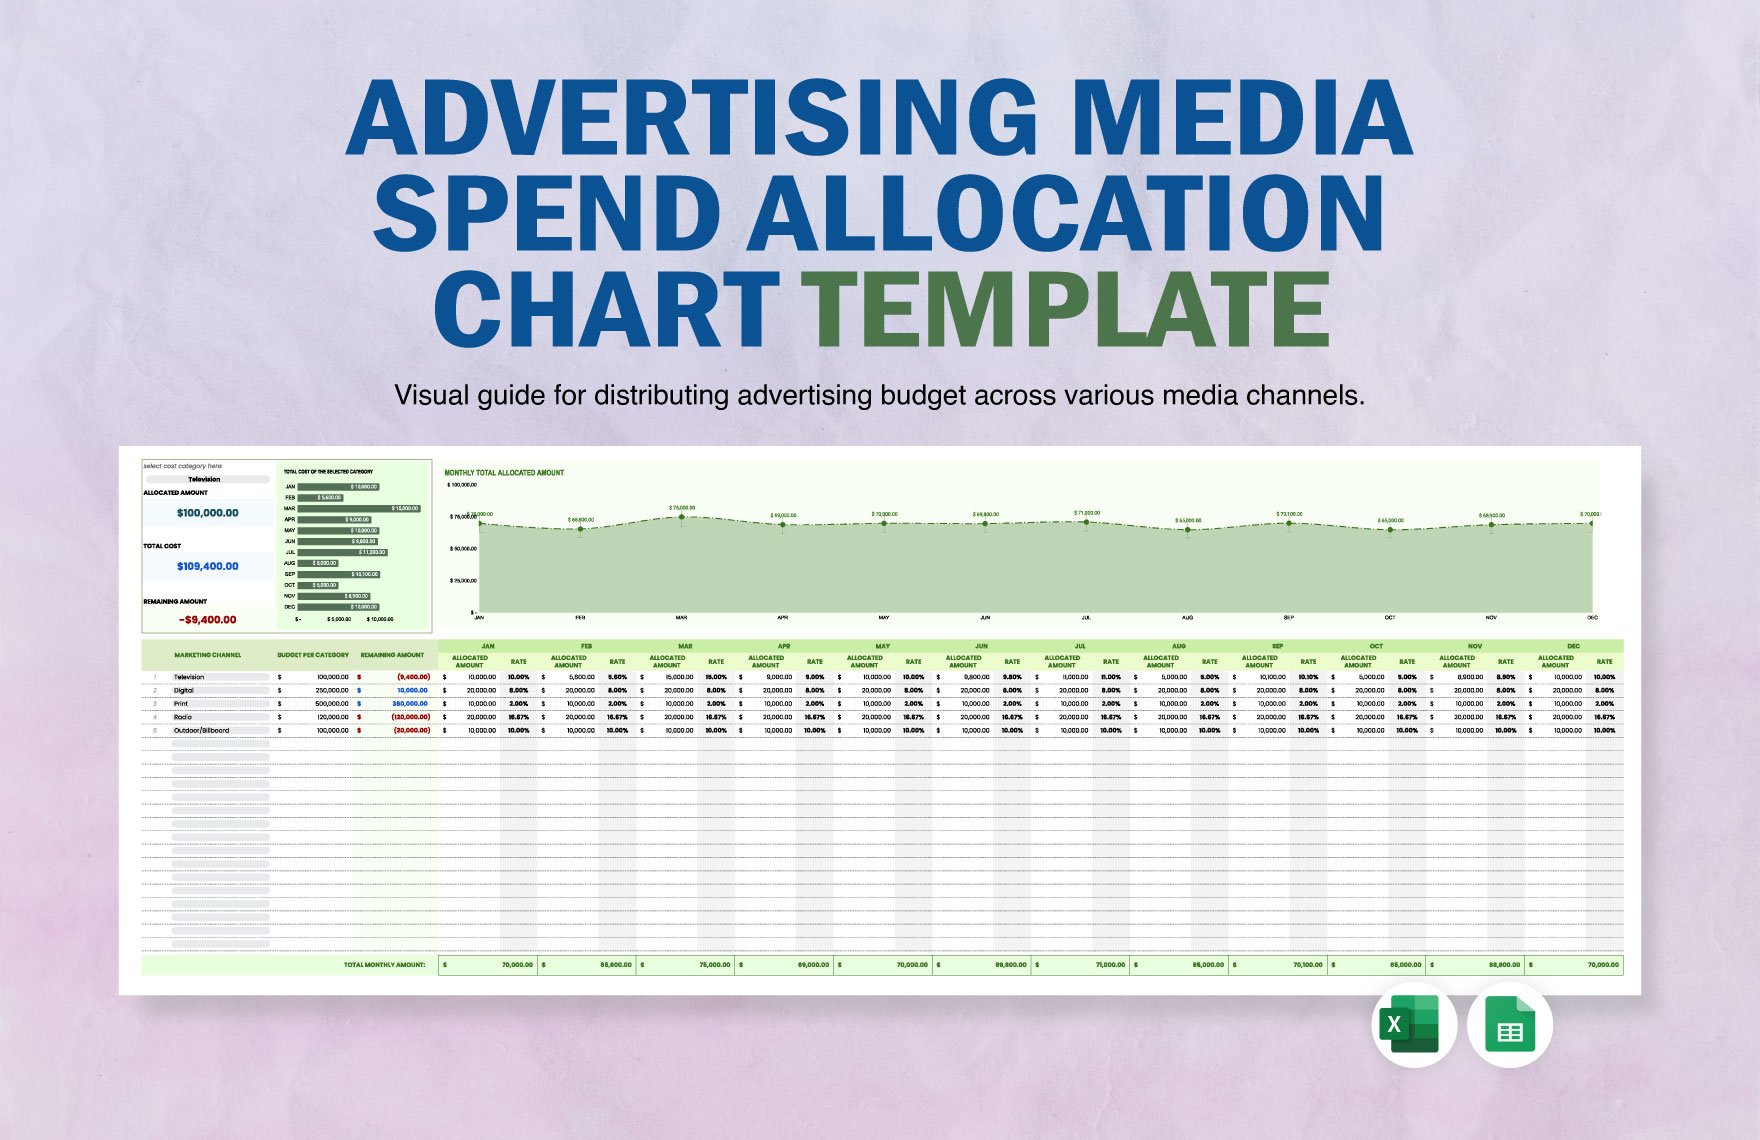 Advertising Media Spend Allocation Chart Template in Excel, Google Sheets